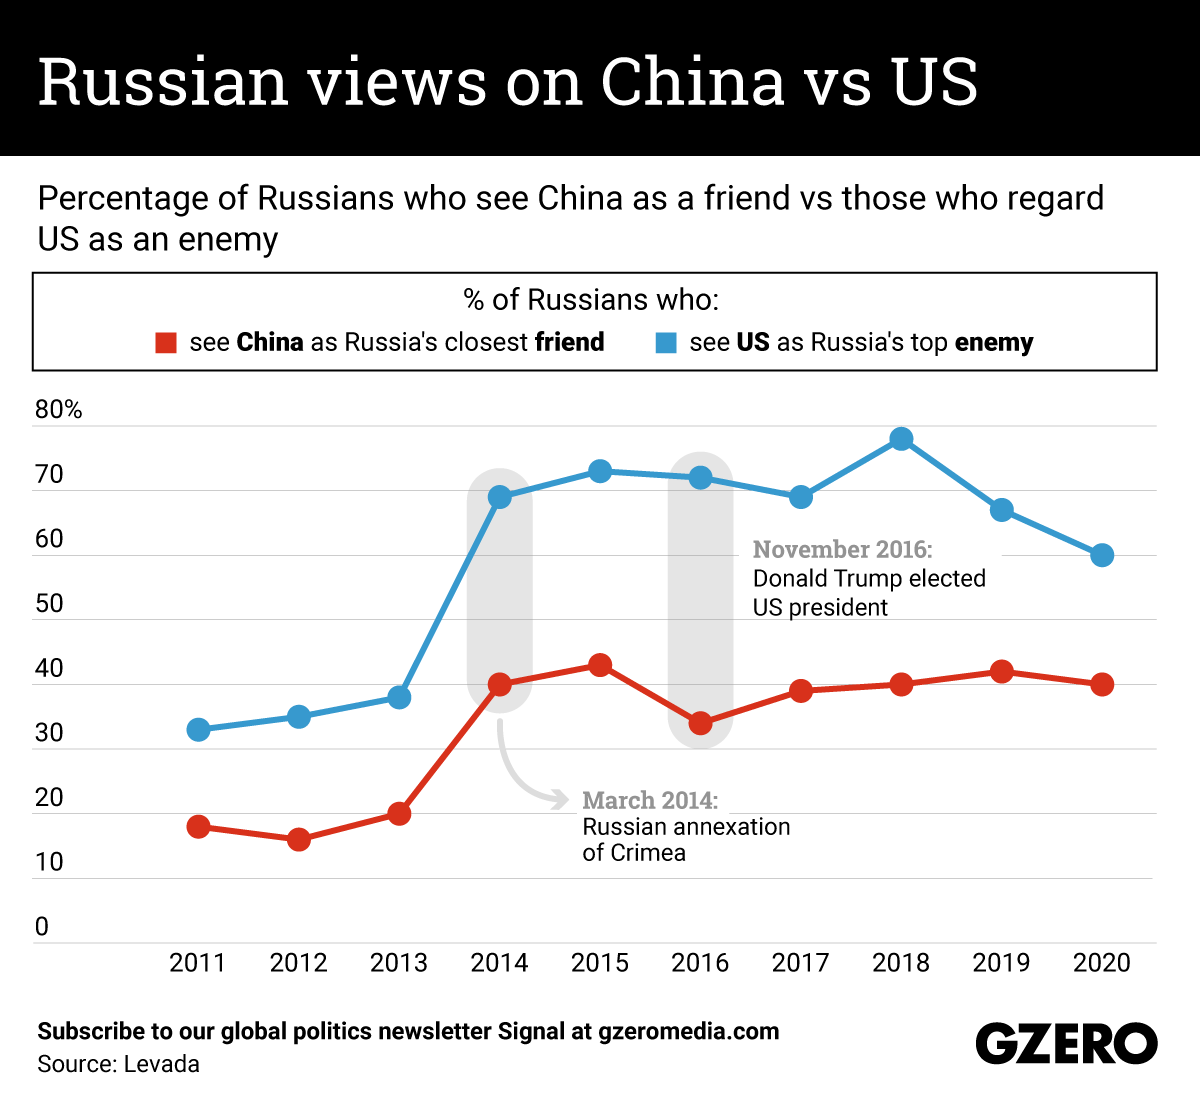 The Graphic Truth: Russian views on China vs US